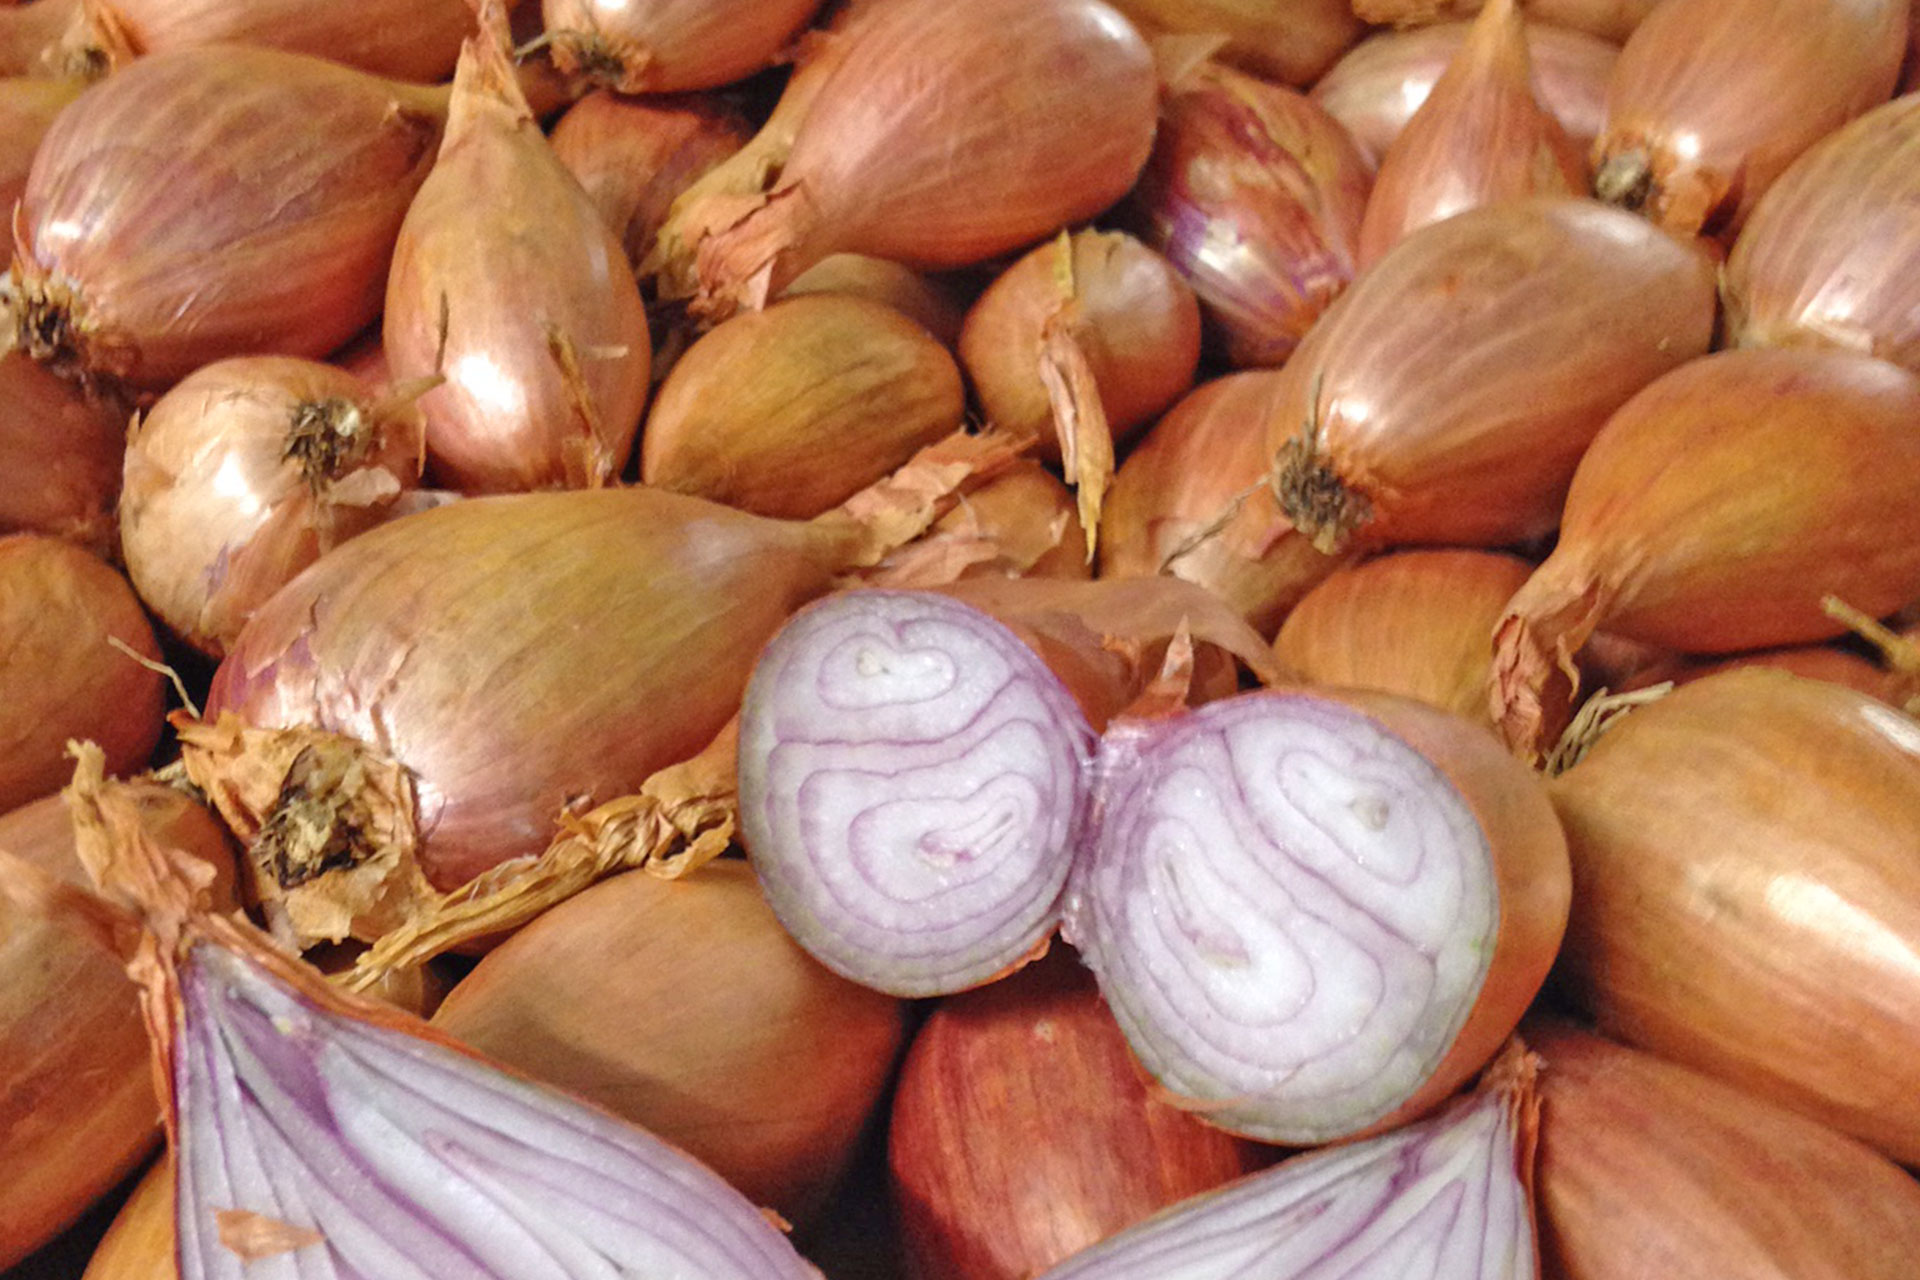 A close-up of brown onions piled on top of each other.